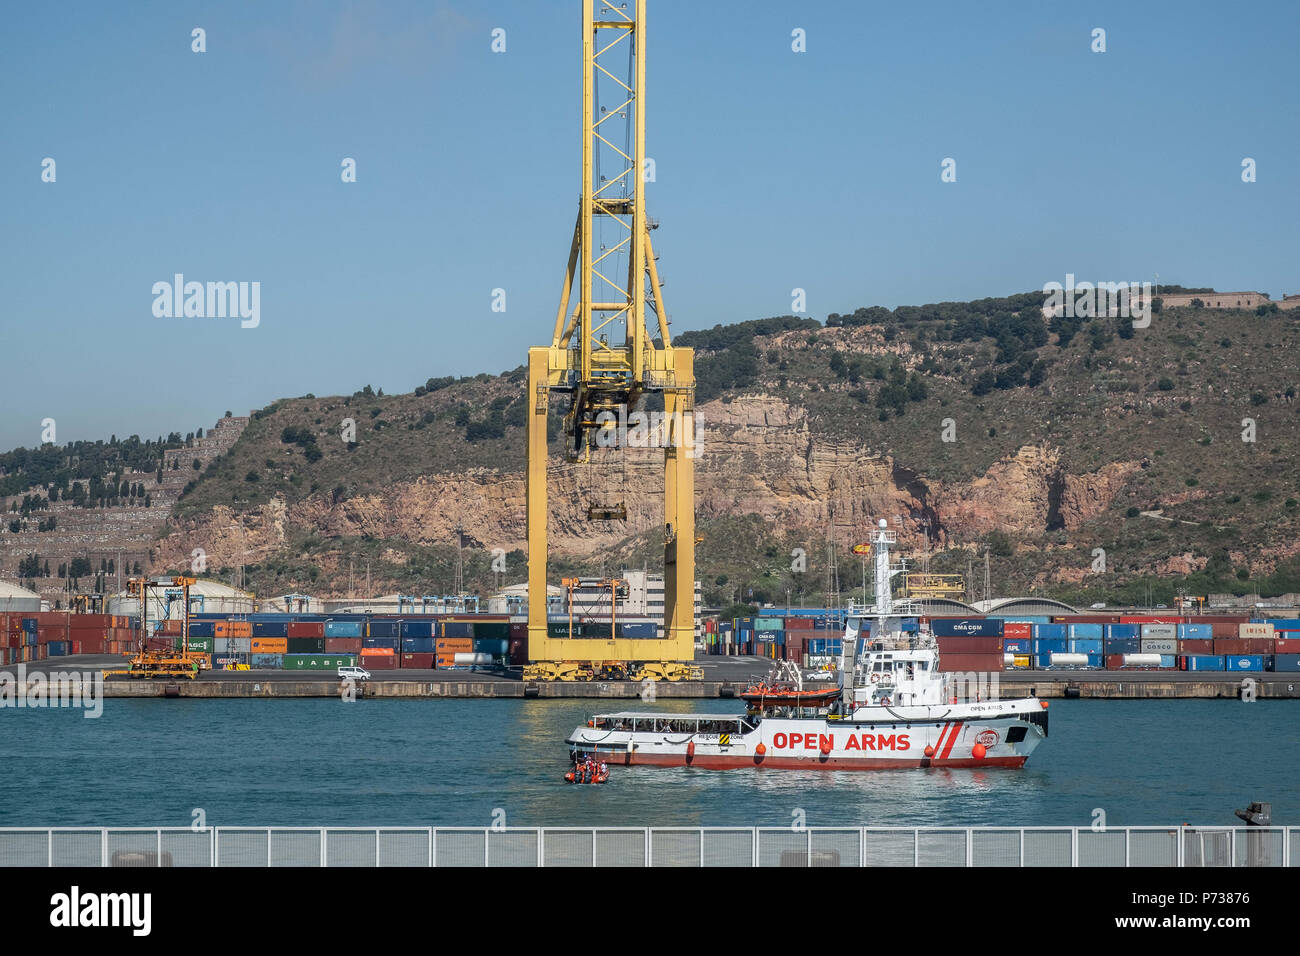 Barcelona, Catalonia, Spain. 4th July, 2018. The rescue boat Proactiva Open Arms has docked in Barcelona with 60 people rescued in the Mediterranean off the coast of Libya. Barcelona has offered itself as a refuge city after Italy's refusal to continue hosting more rescues carried out by NGOs. Credit: Paco Freire/SOPA Images/ZUMA Wire/Alamy Live News Stock Photo